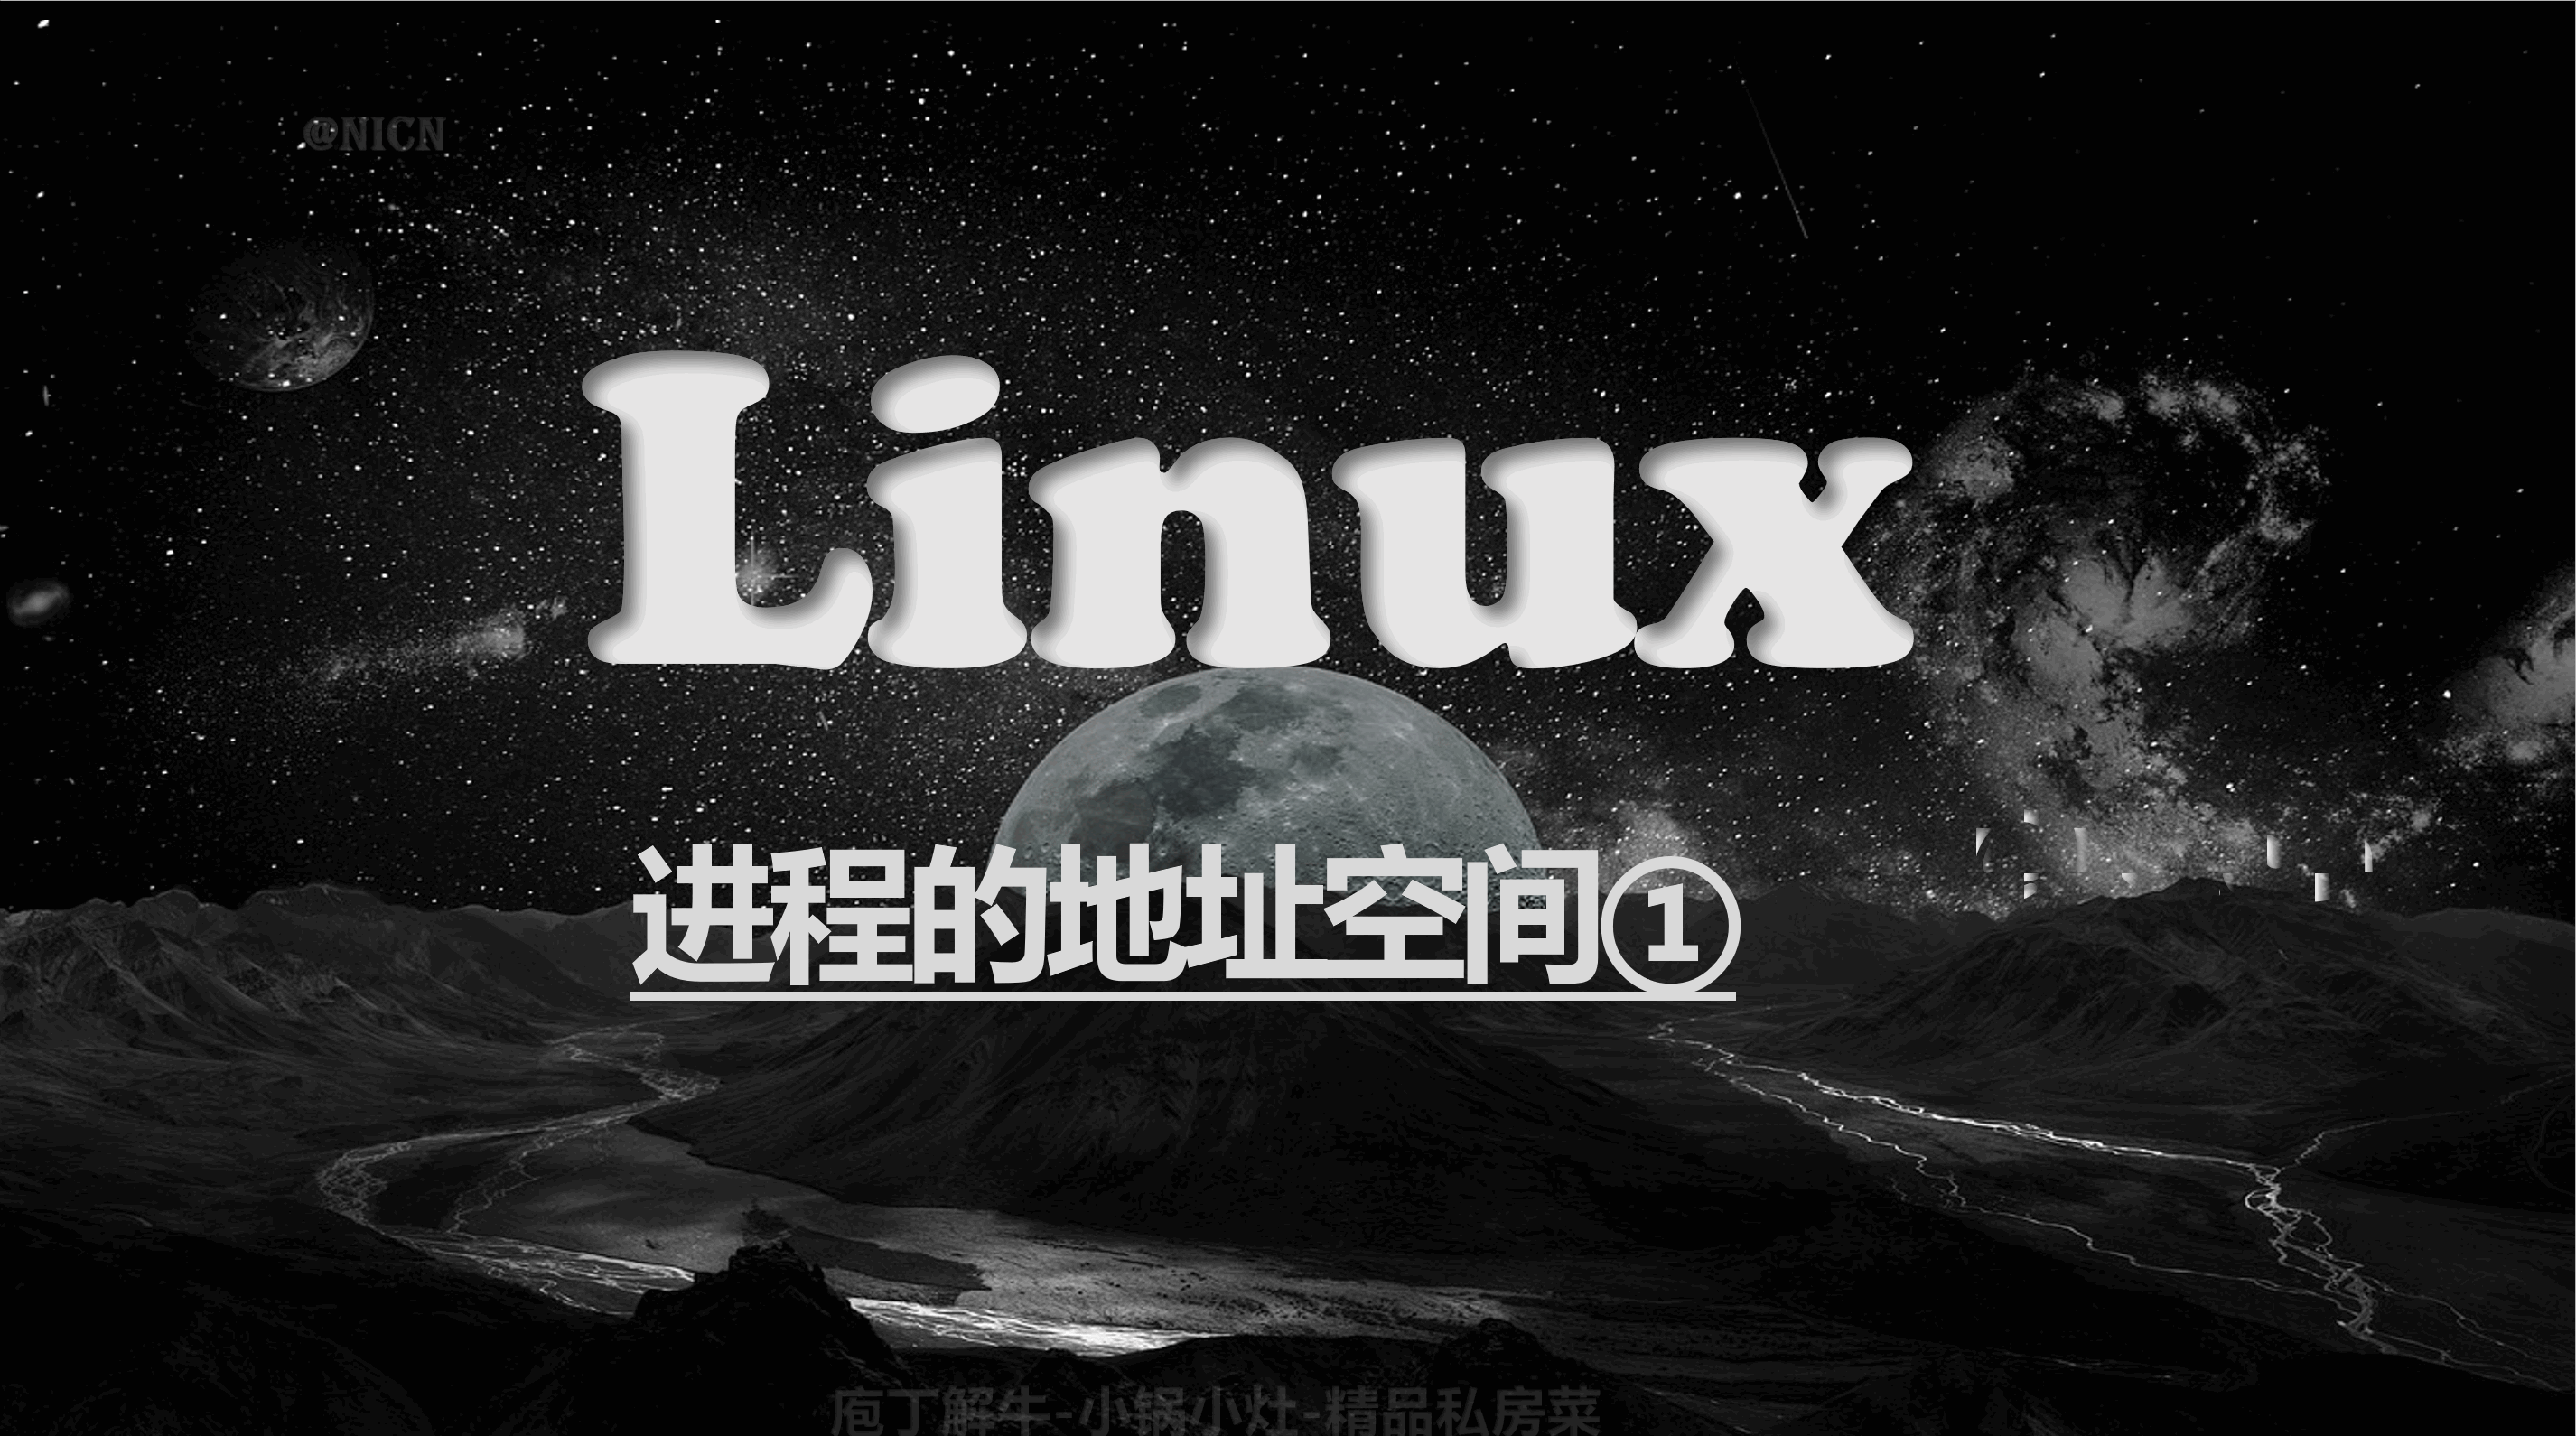 【<span style='color:red;'>Linux</span>】<span style='color:red;'>进程</span><span style='color:red;'>的</span><span style='color:red;'>程序</span><span style='color:red;'>地址</span><span style='color:red;'>空间</span>①